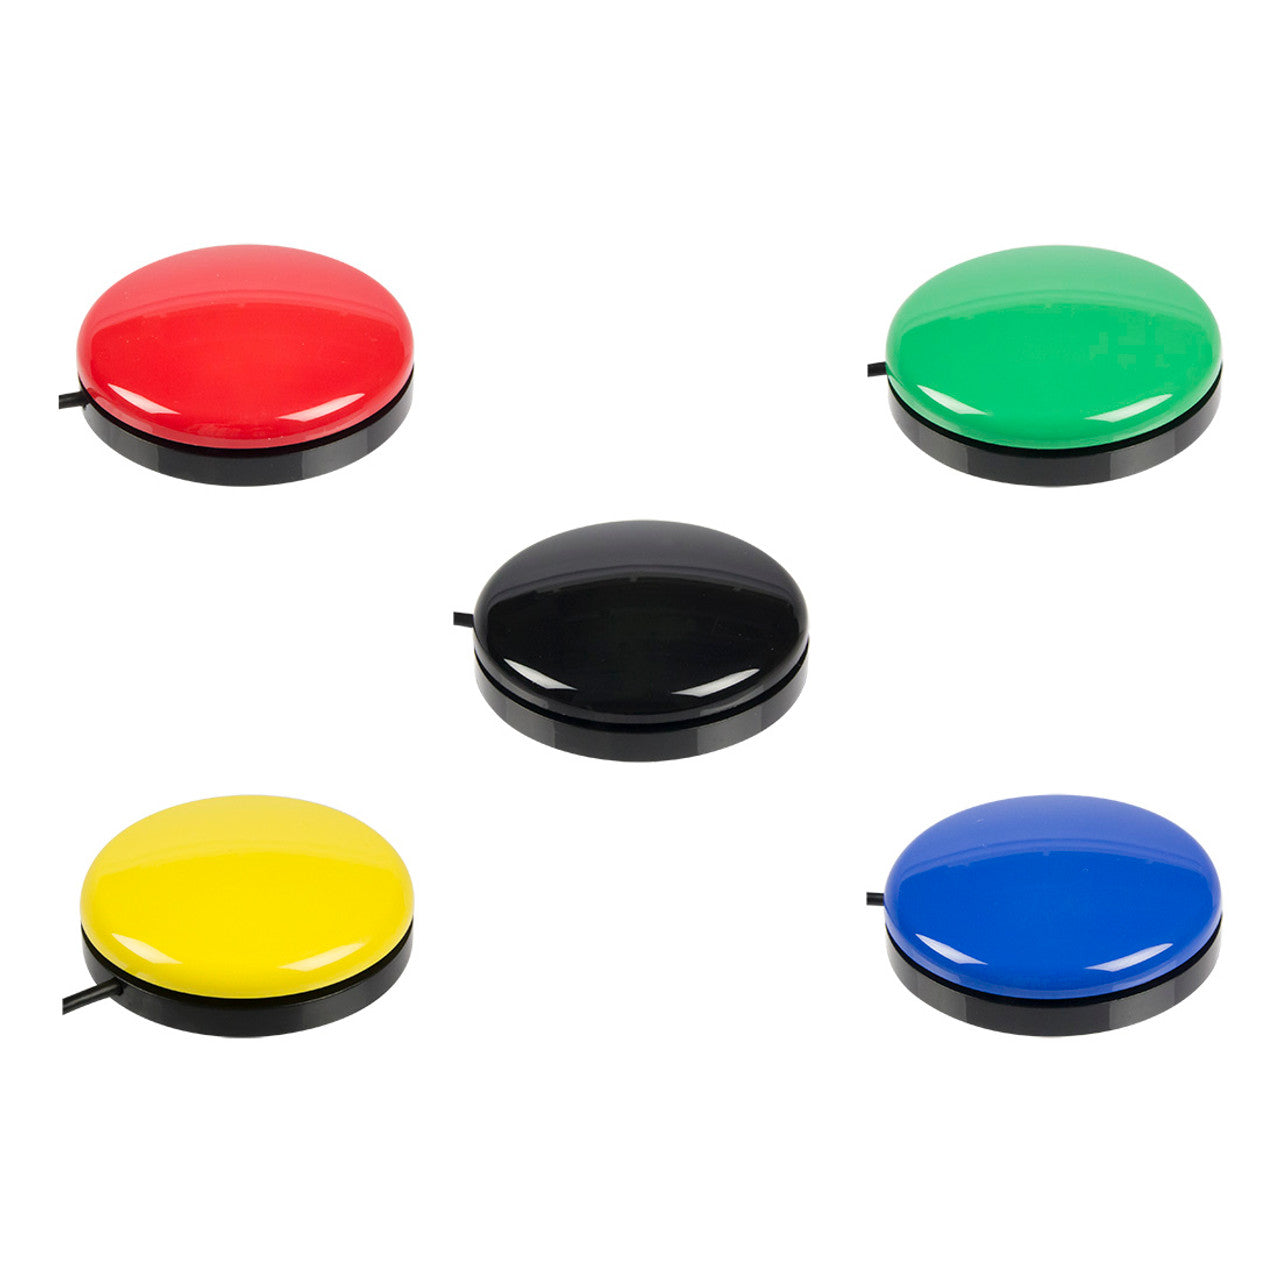 Buddy Button Switch five colors